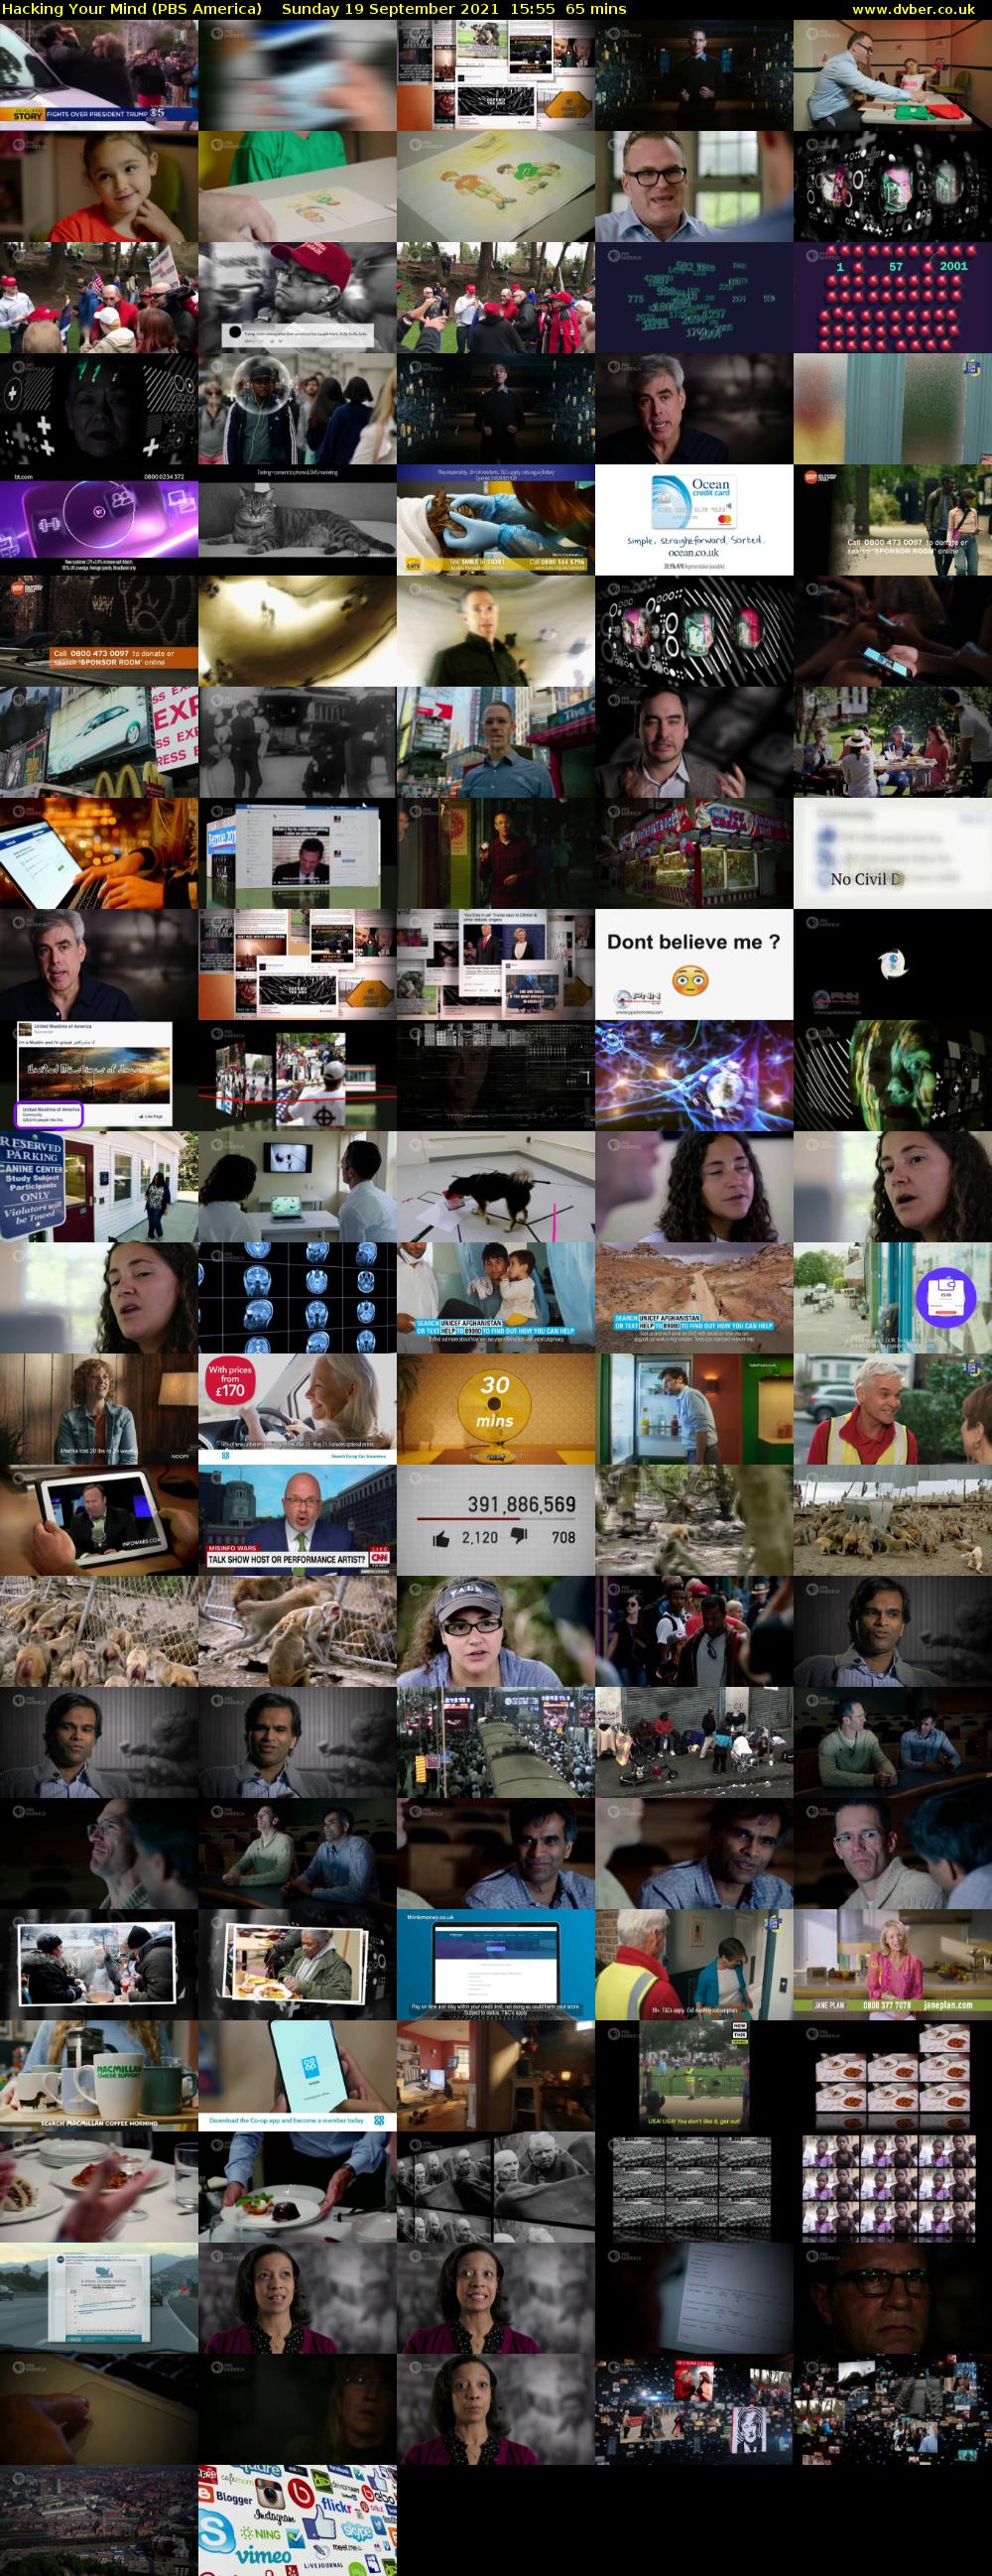 Hacking Your Mind (PBS America) Sunday 19 September 2021 15:55 - 17:00